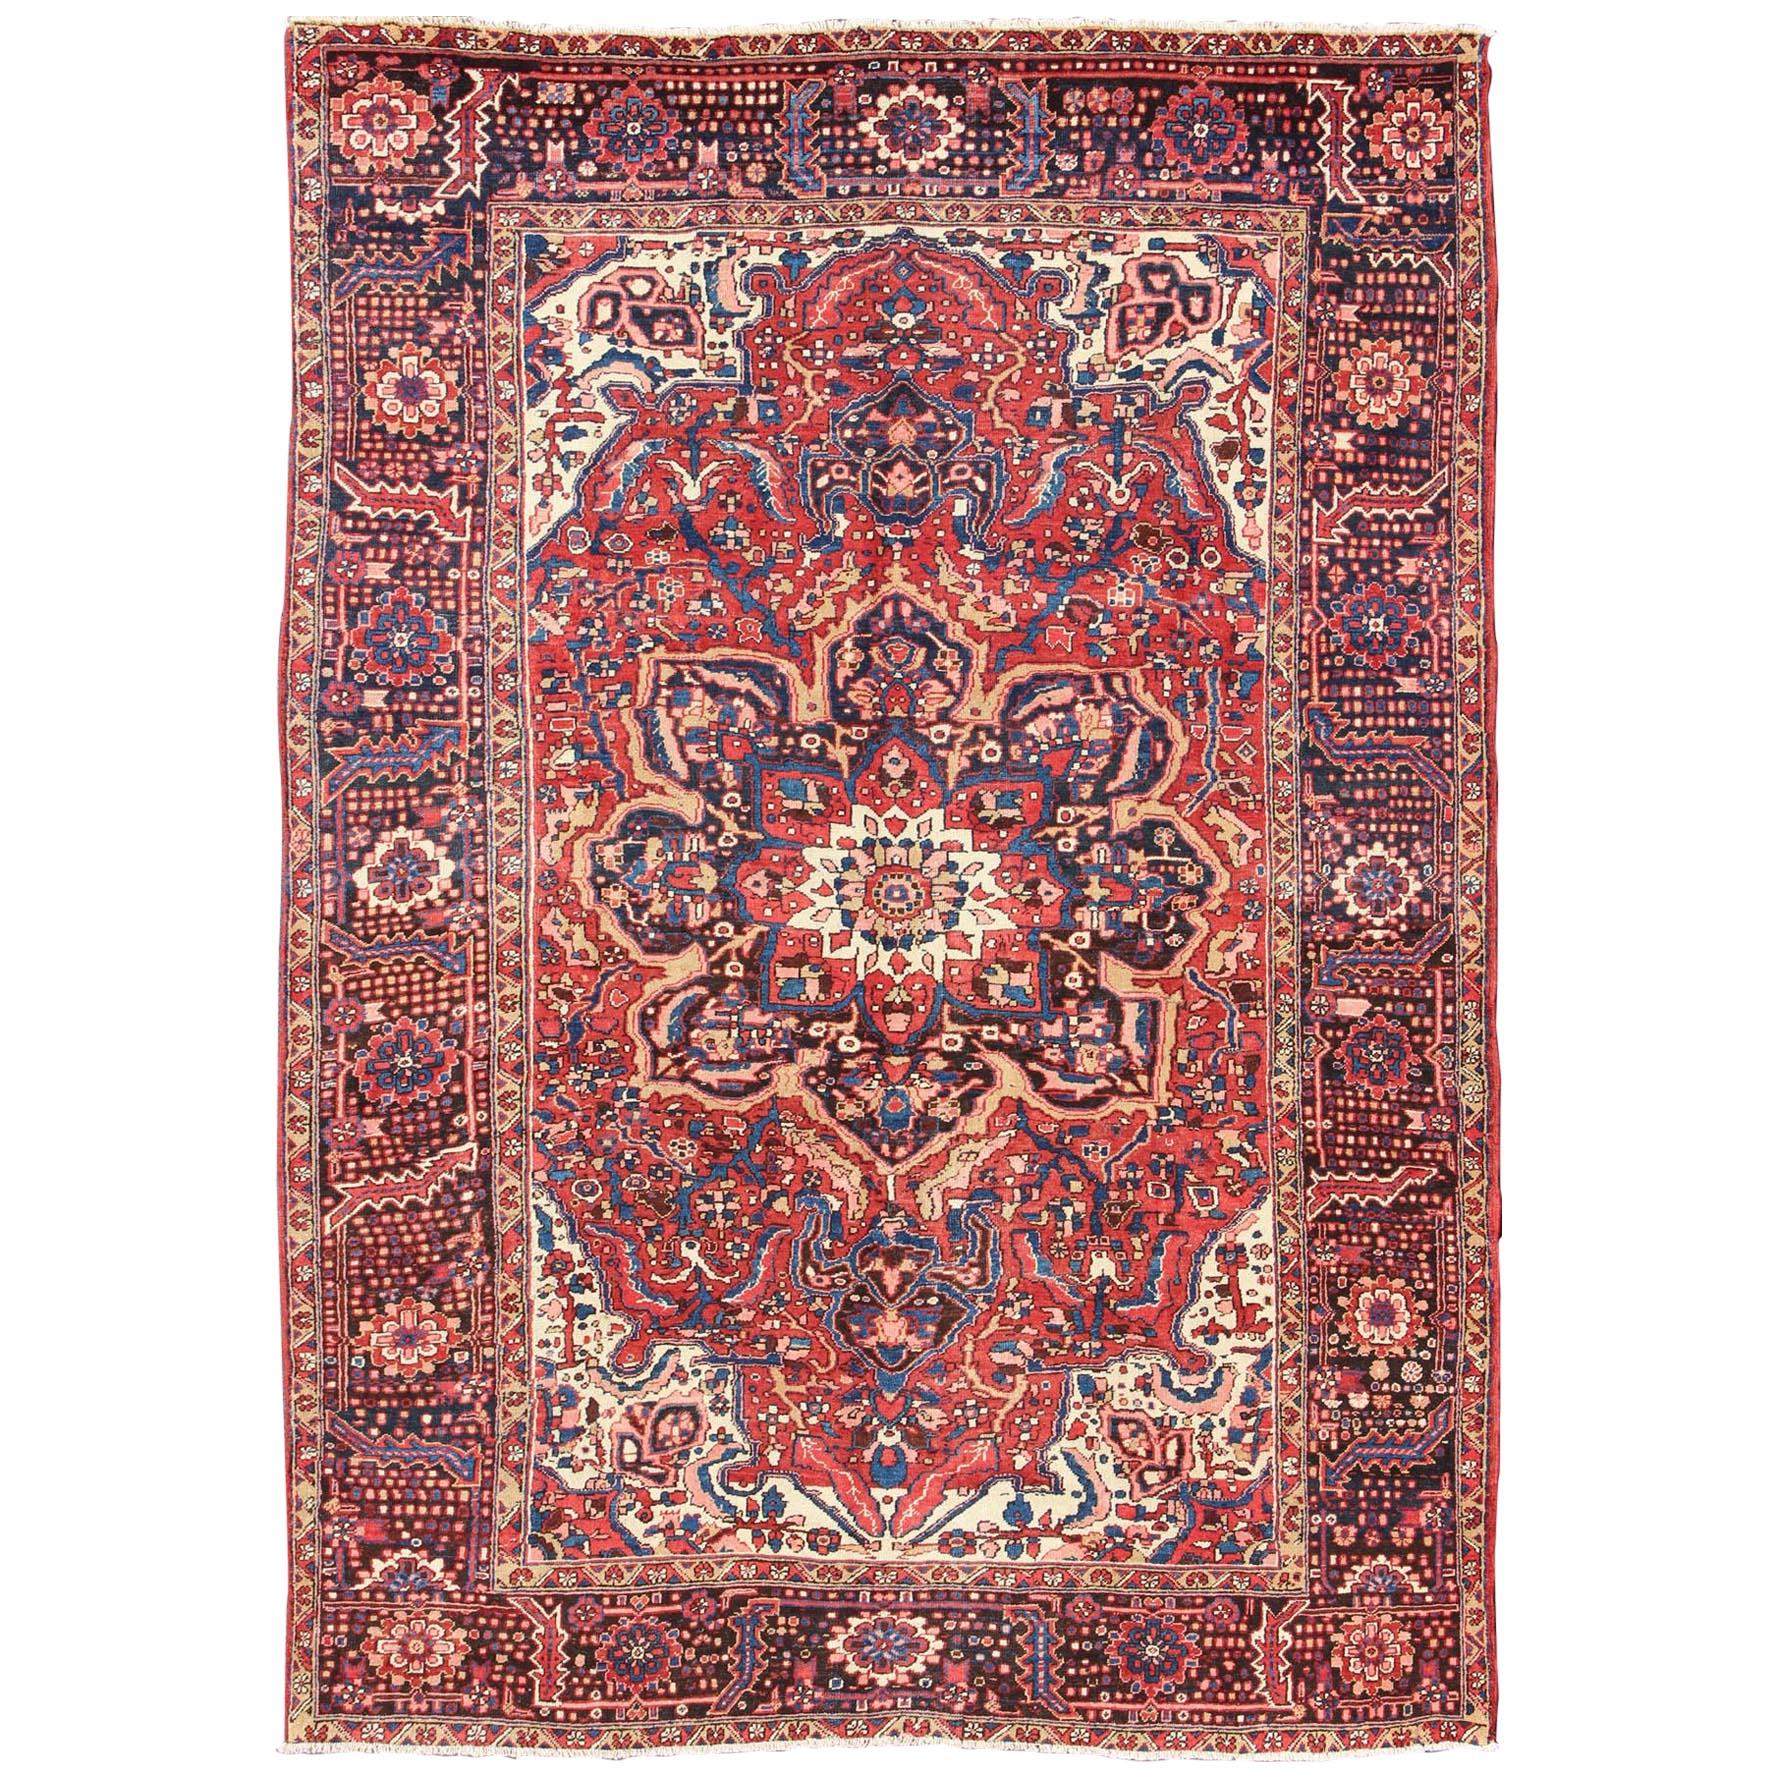 Semi Antique Persian Heriz Rug with Stylized Medallion Design in Red and Blue